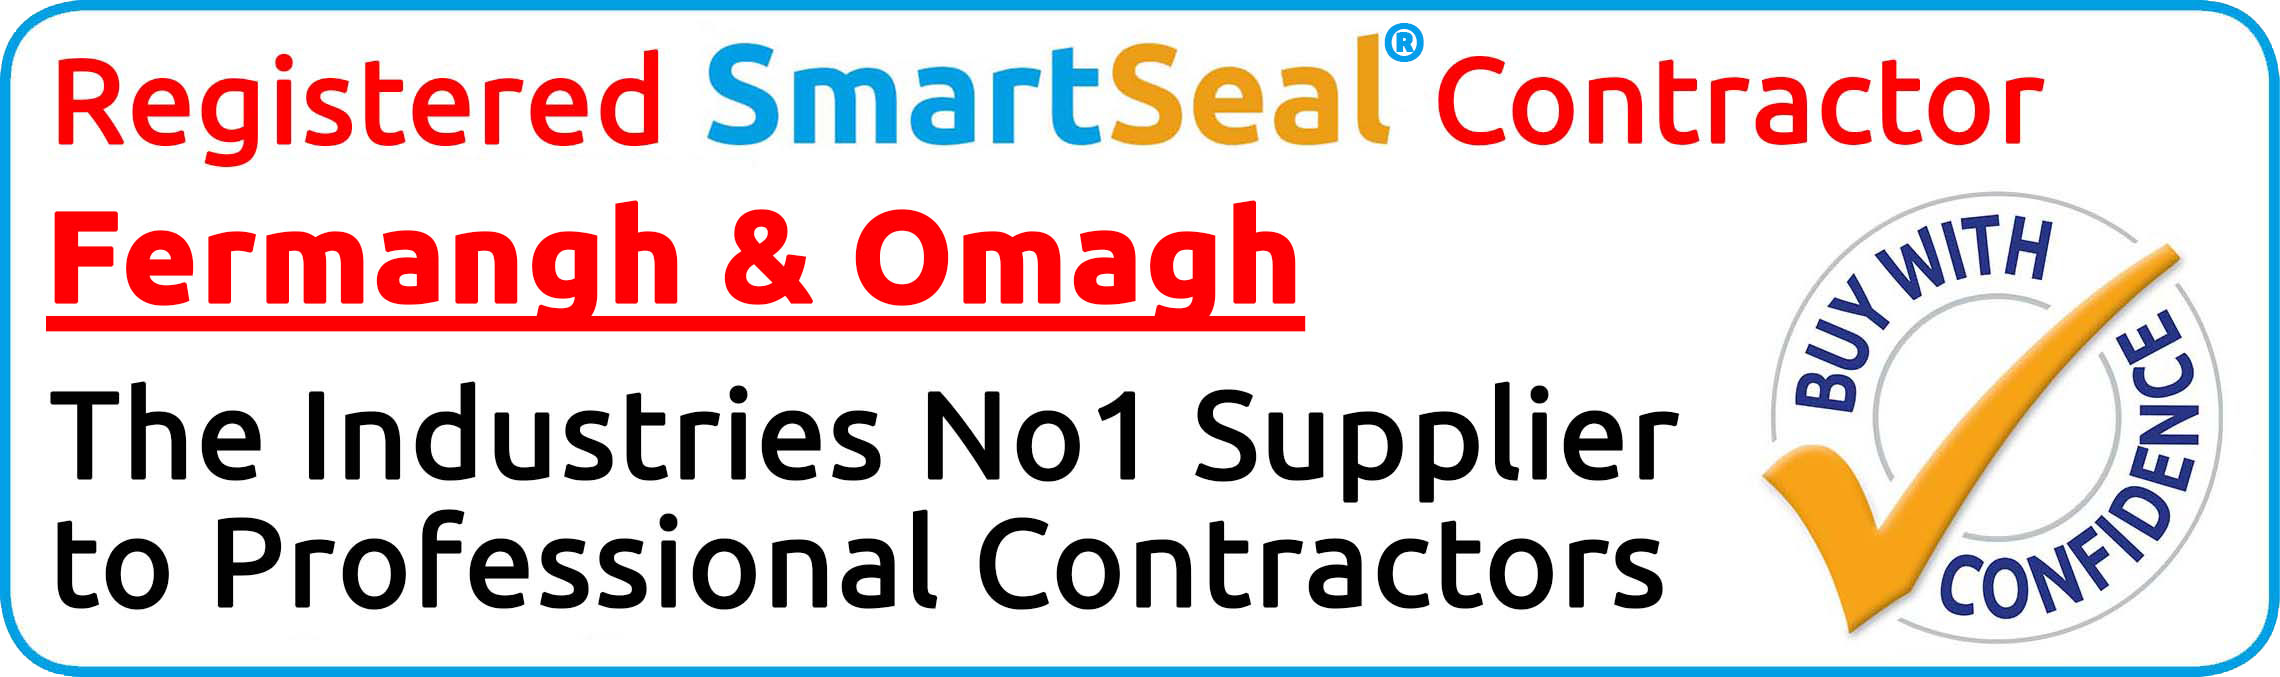 Your Registered Smartseal Contractor For Fermanagh & Omagh